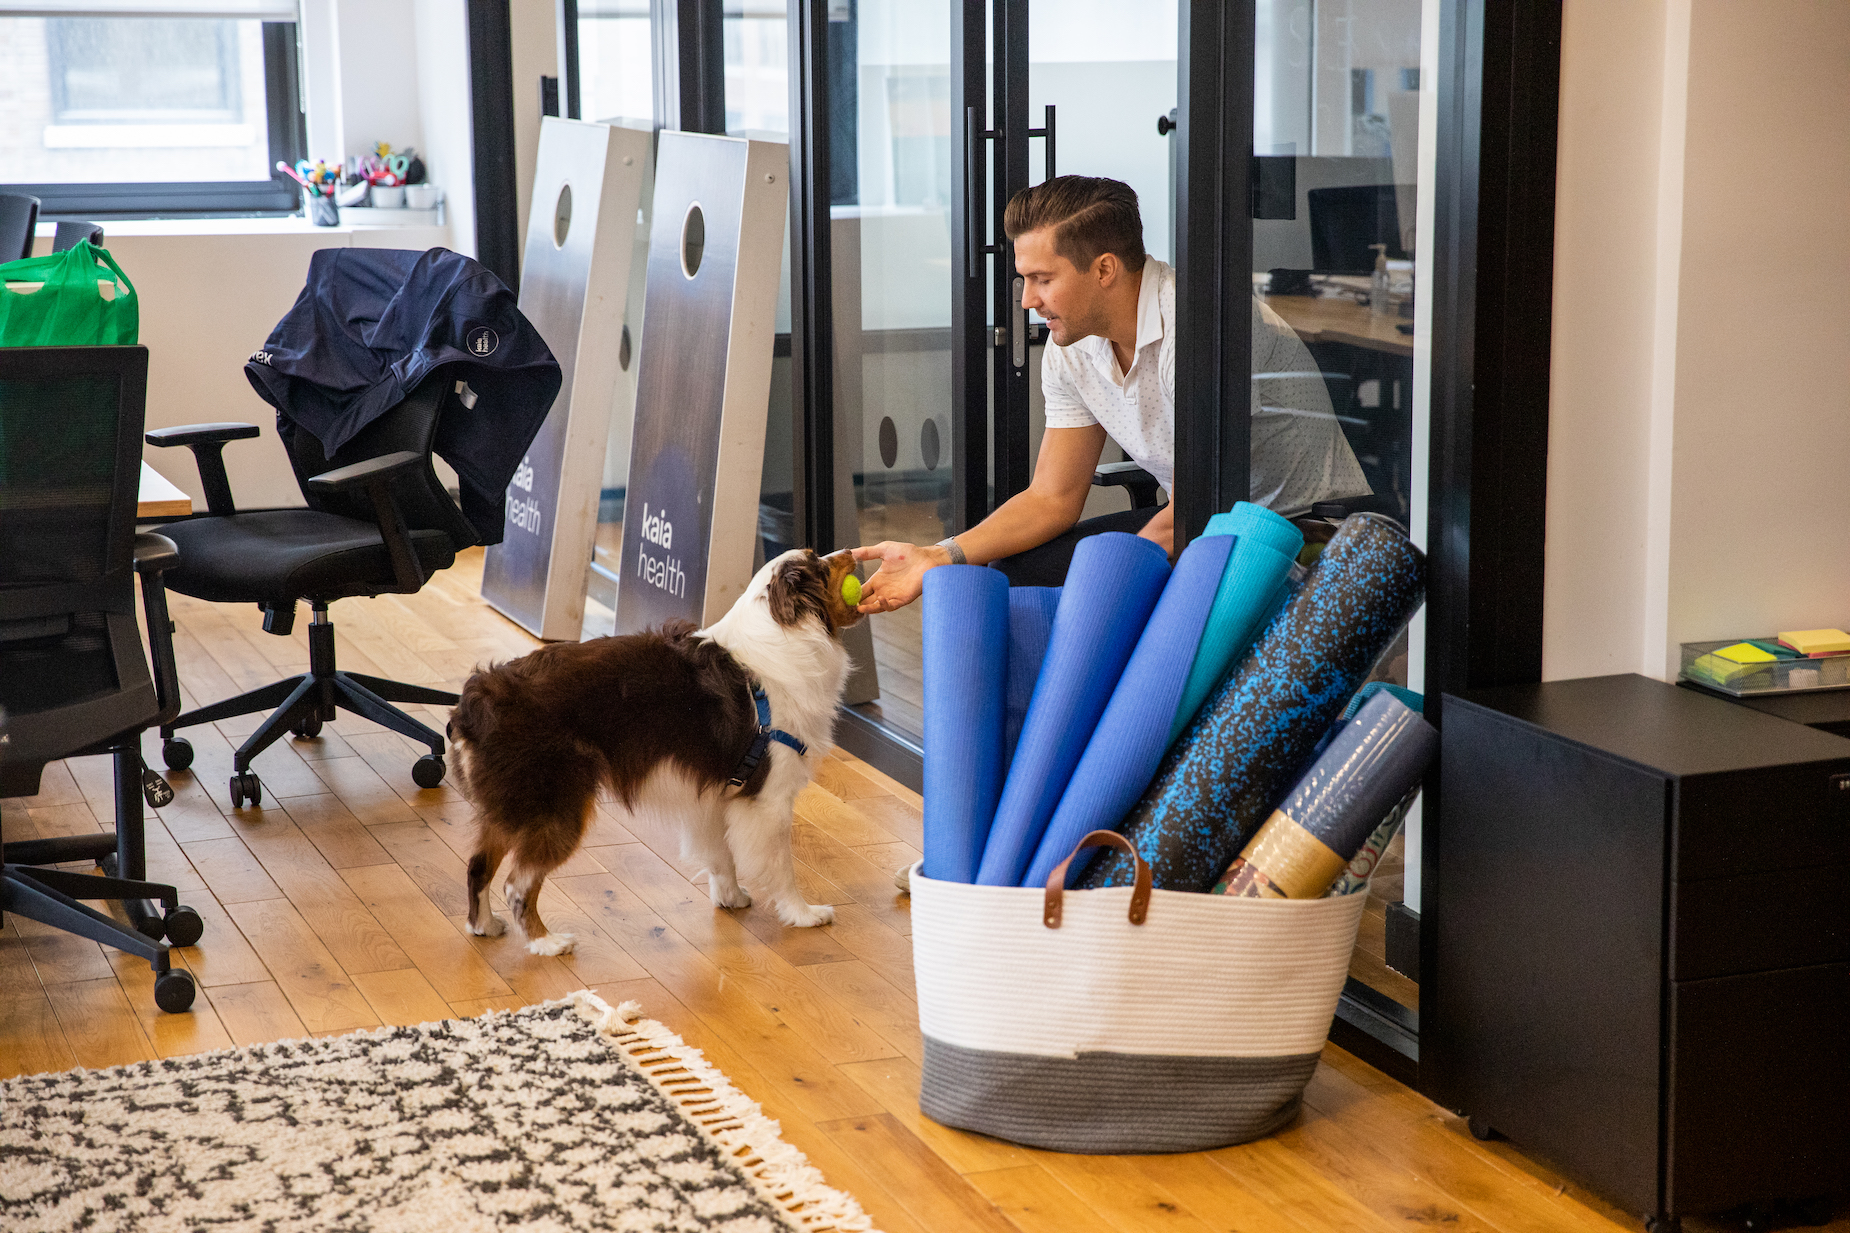 An employee plays fetch with a dog in the office.